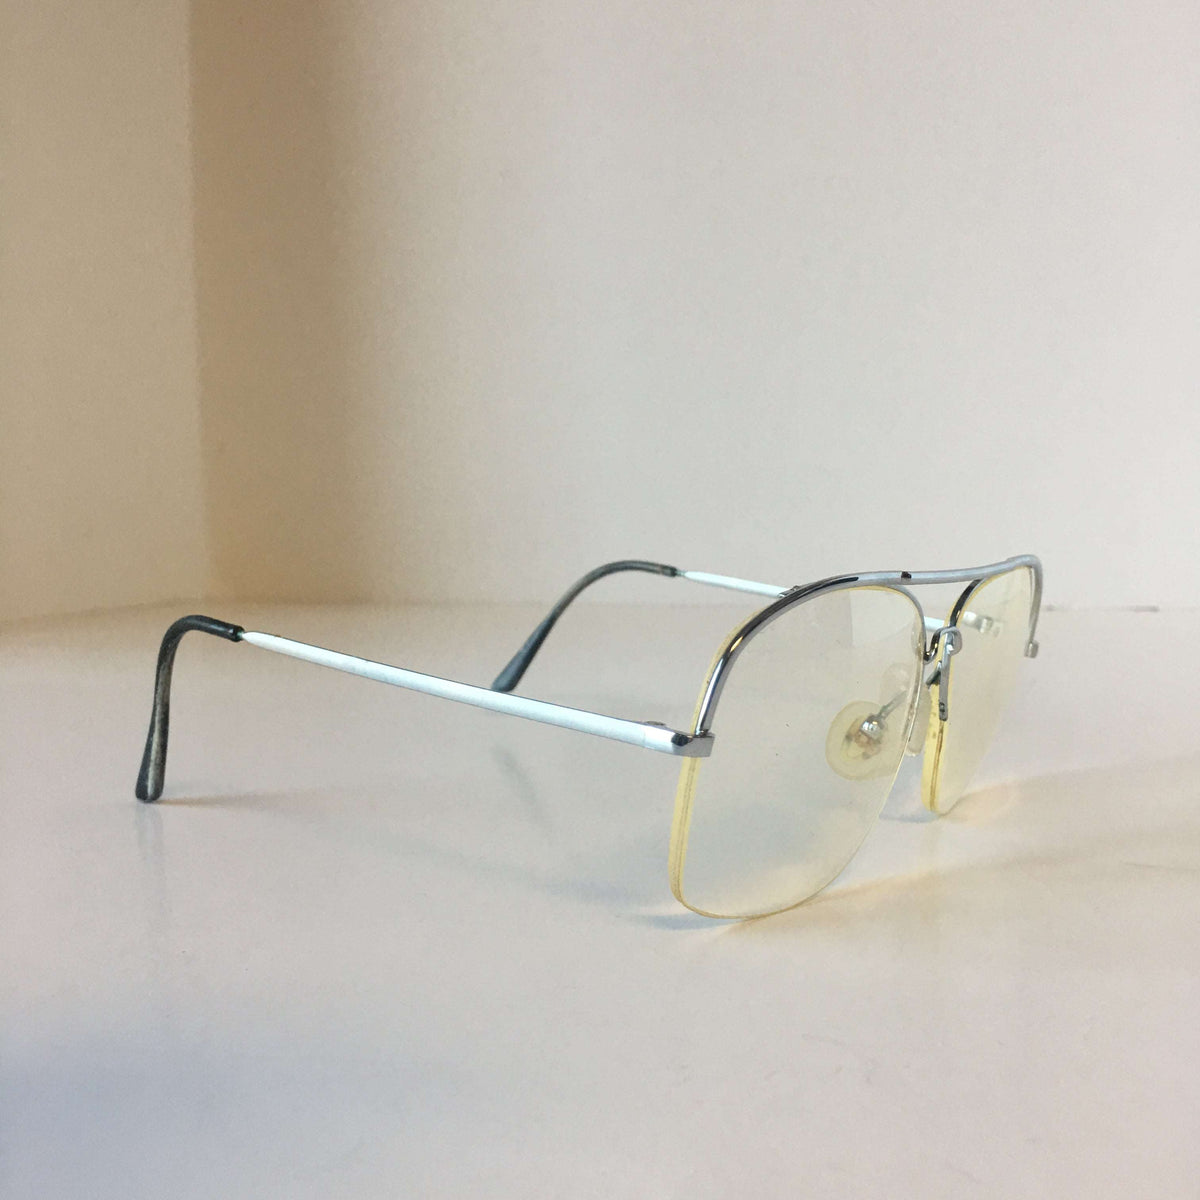 Retro Chic: Authentic Vintage Eyewear with Silver Metal Frame